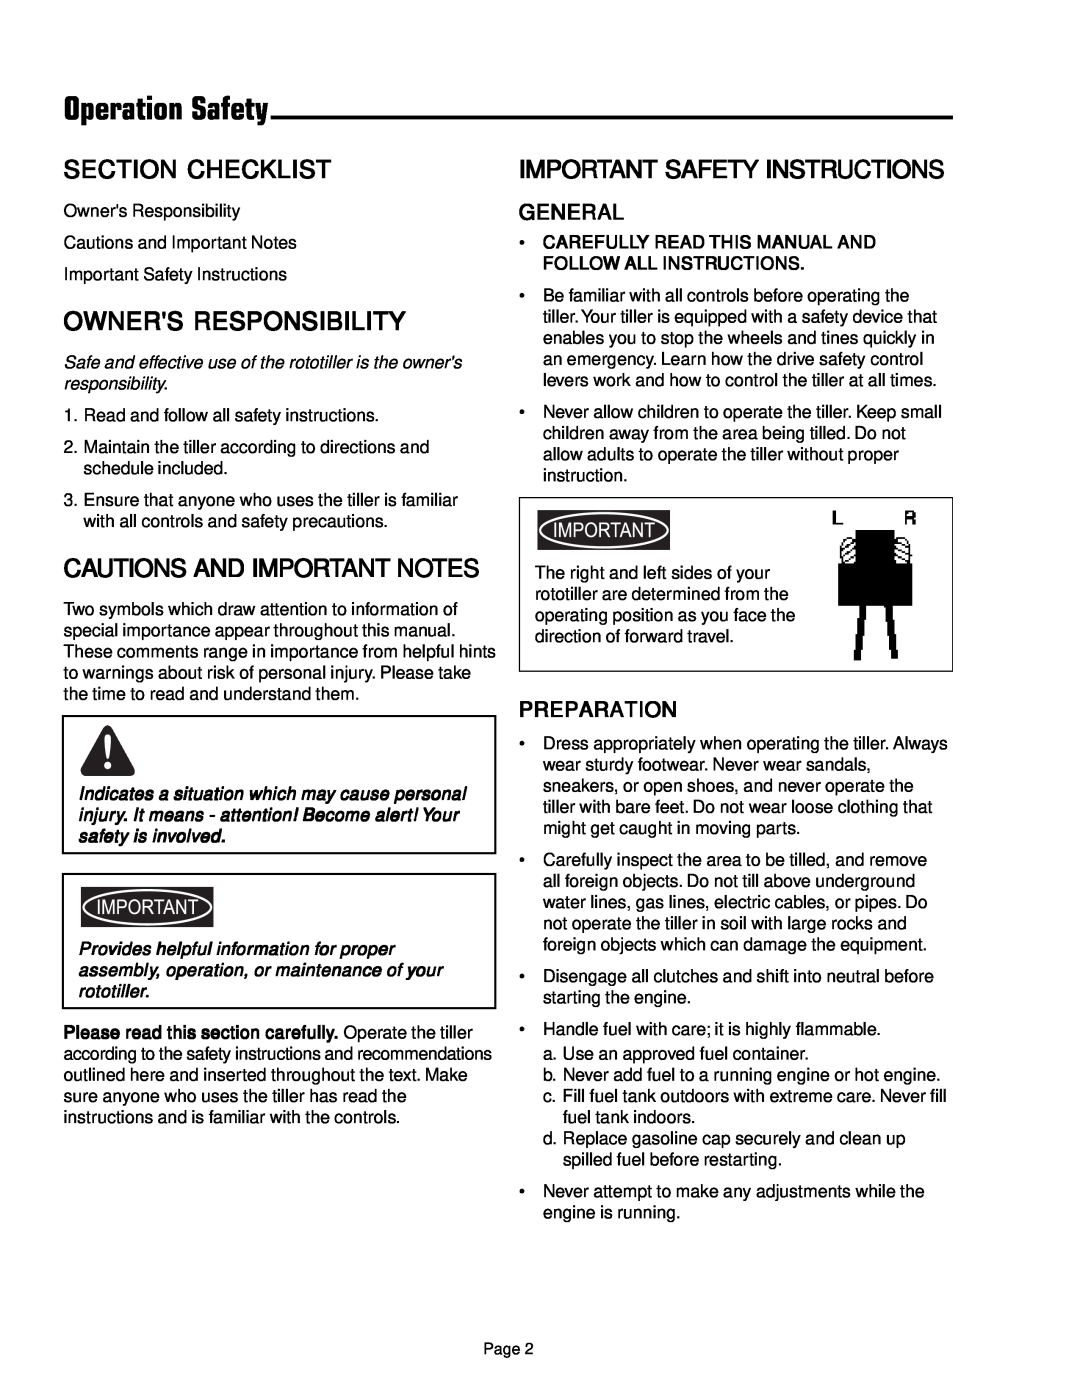 Simplicity 1693847 manual Operation Safety, Section Checklist, Owners Responsibility, Cautions And Important Notes, General 